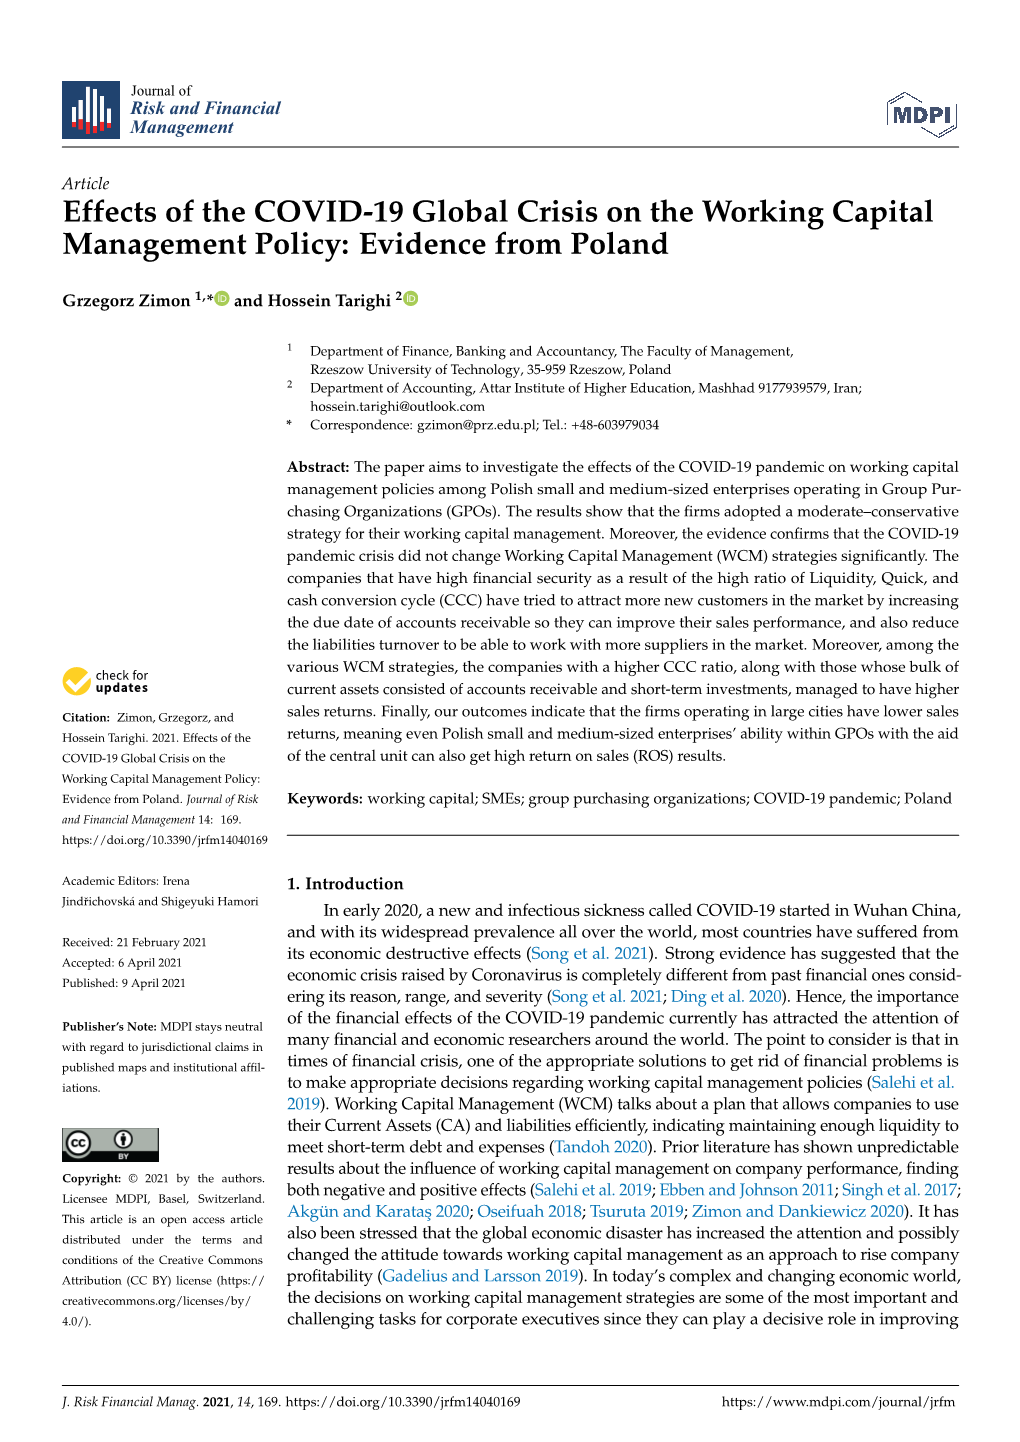 Effects of the COVID-19 Global Crisis on the Working Capital Management Policy: Evidence from Poland